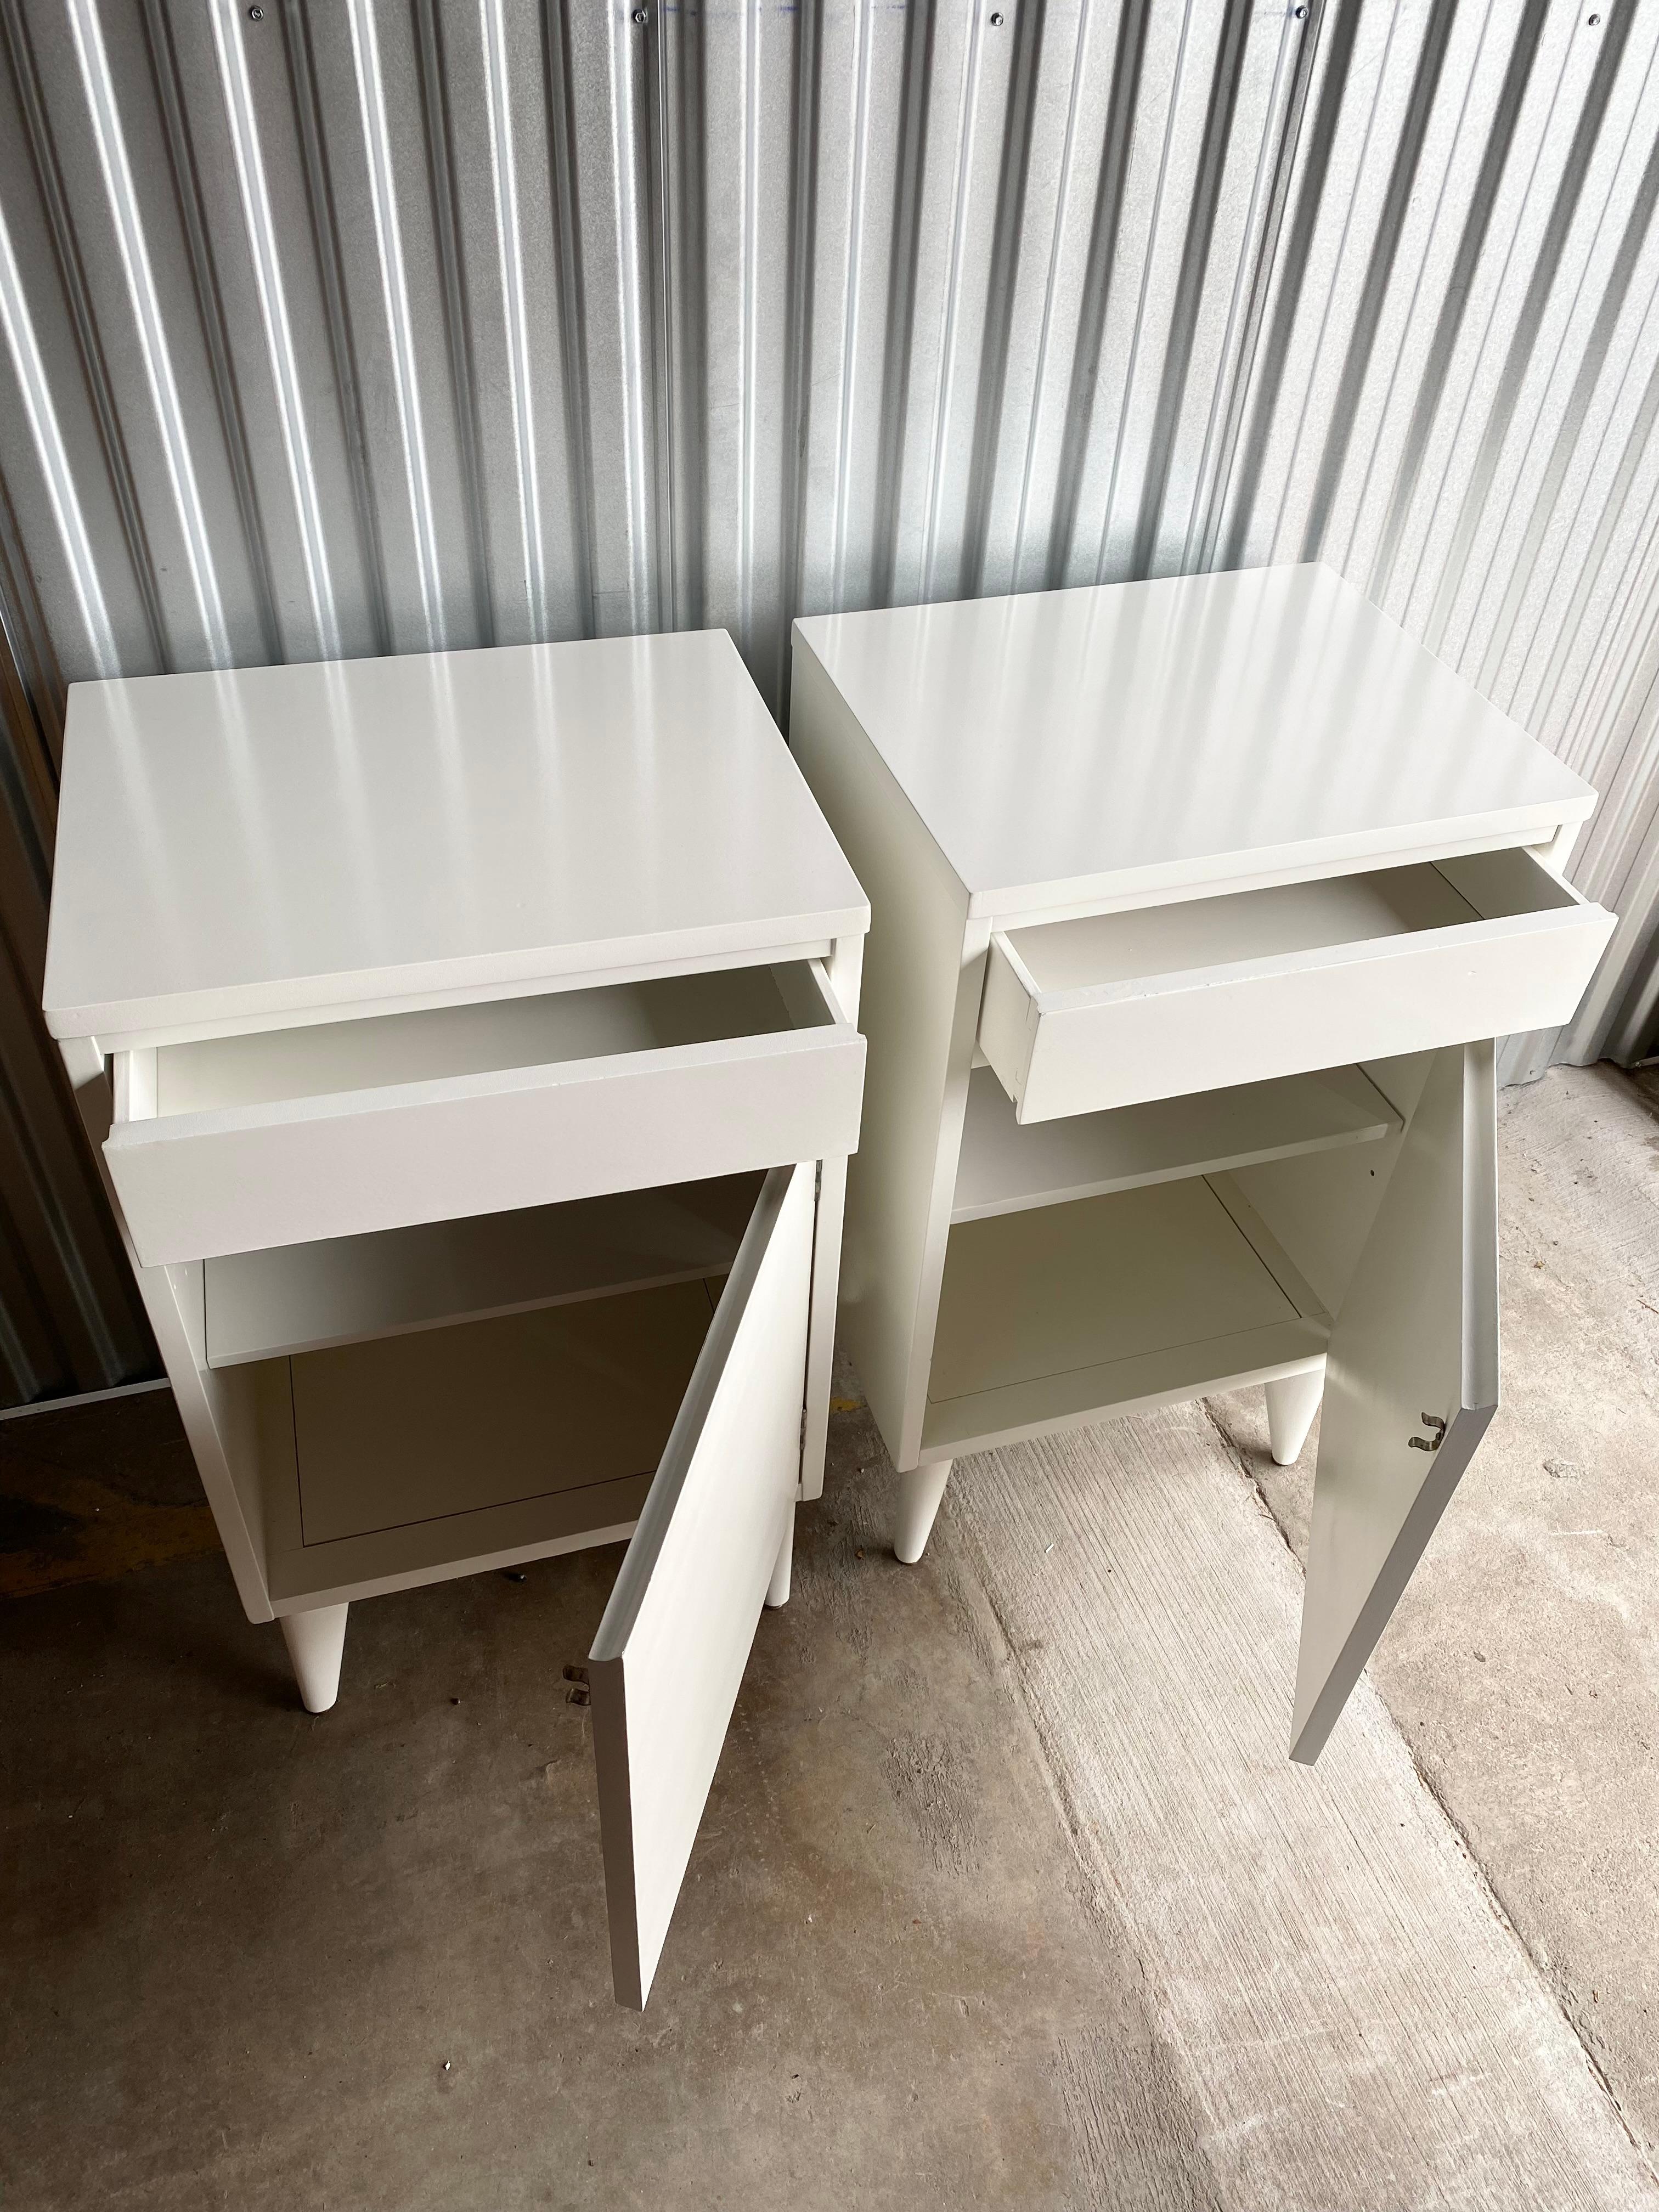 20th Century Midcentury Modern Pair of Glossy White Lab Cabinet Nightstands For Sale